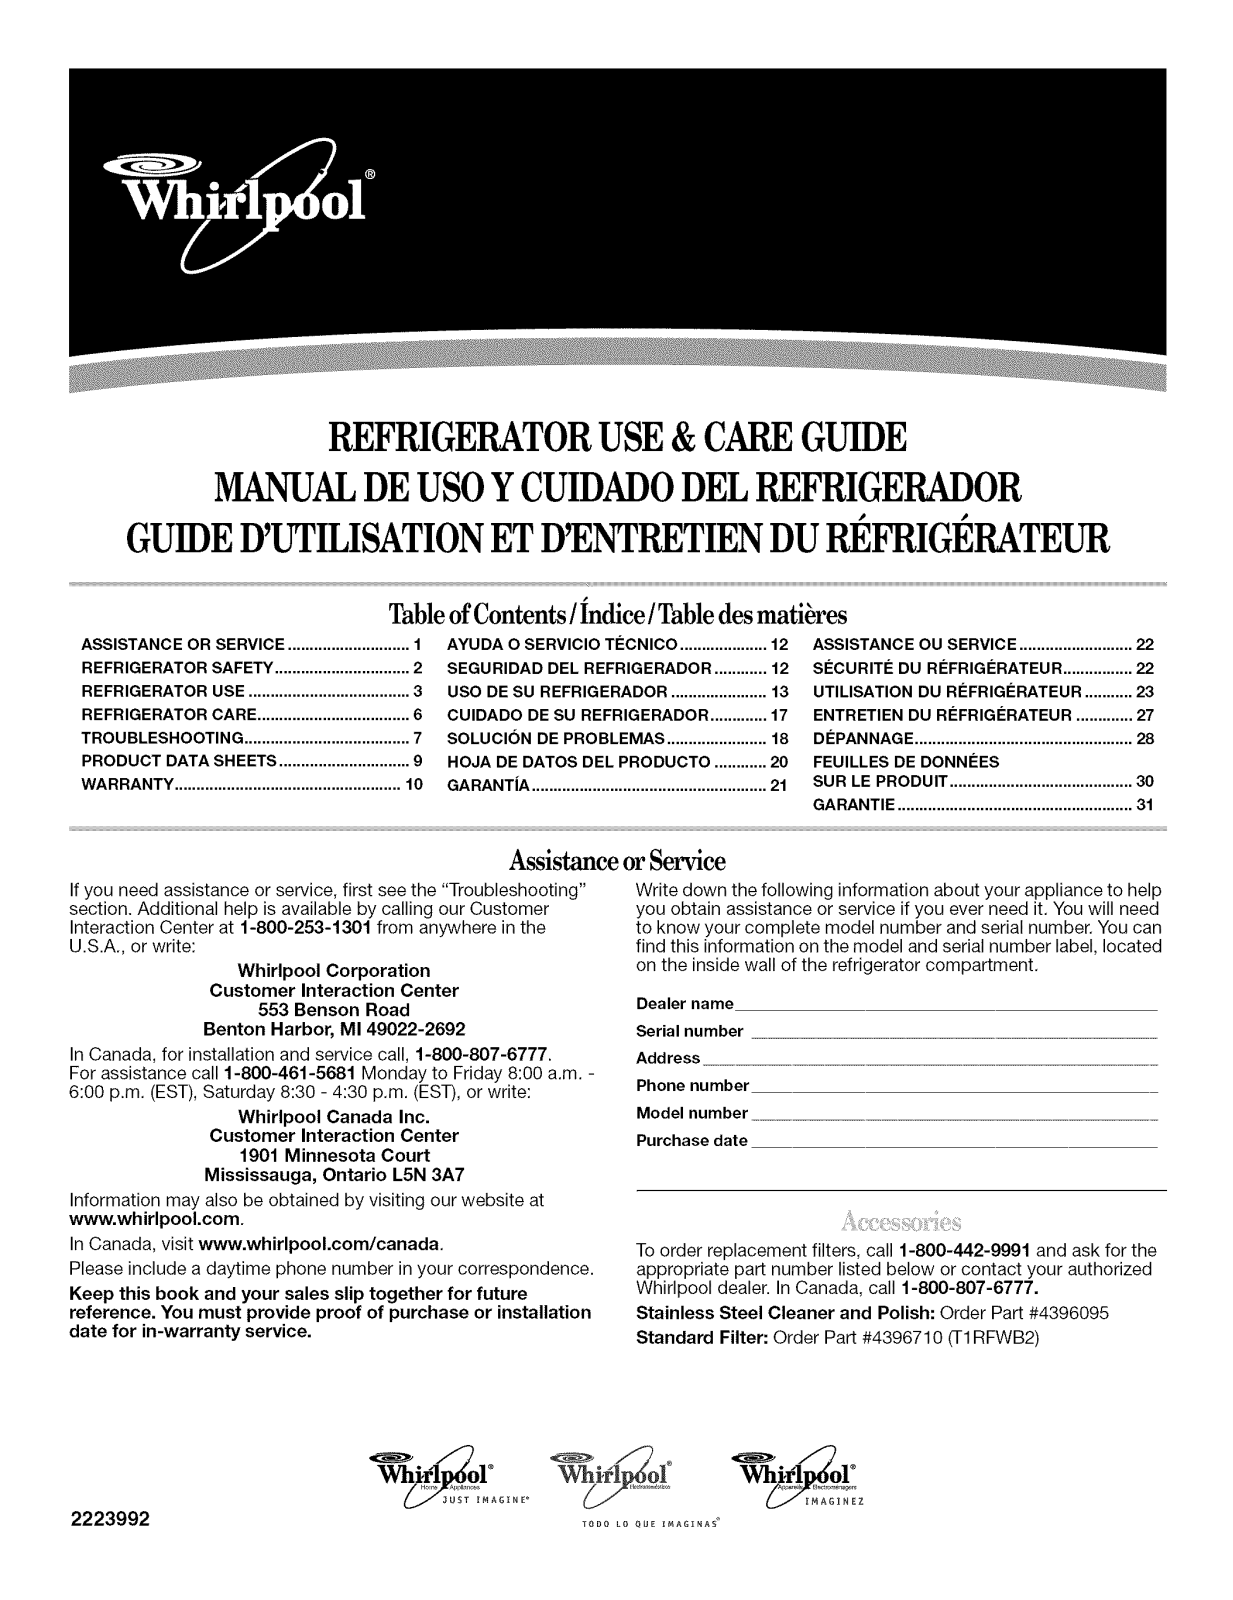 Whirlpool 2223992 Use and Care Guide